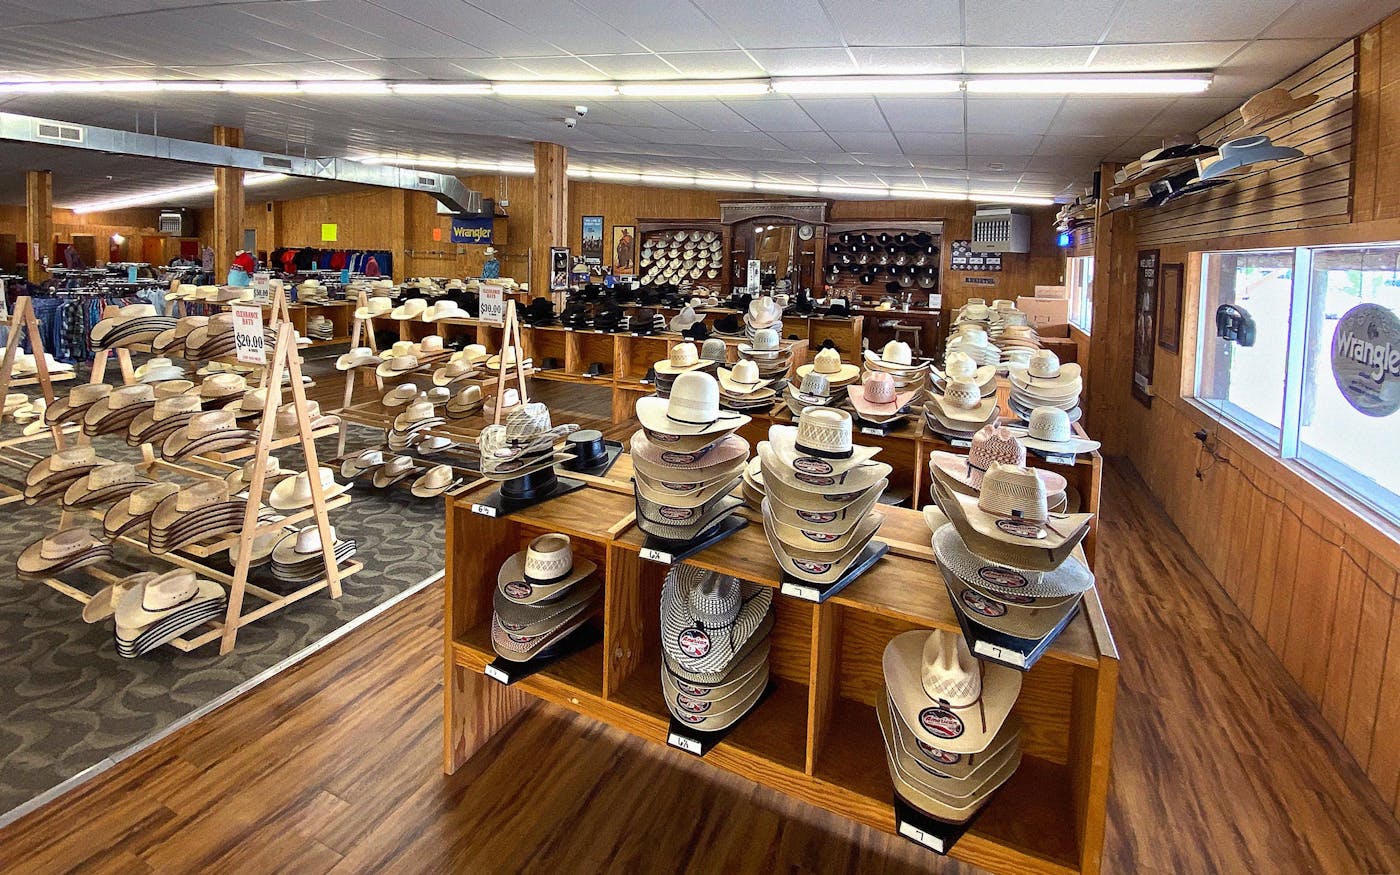 Is This the Largest Western Wear Shop in the World? An